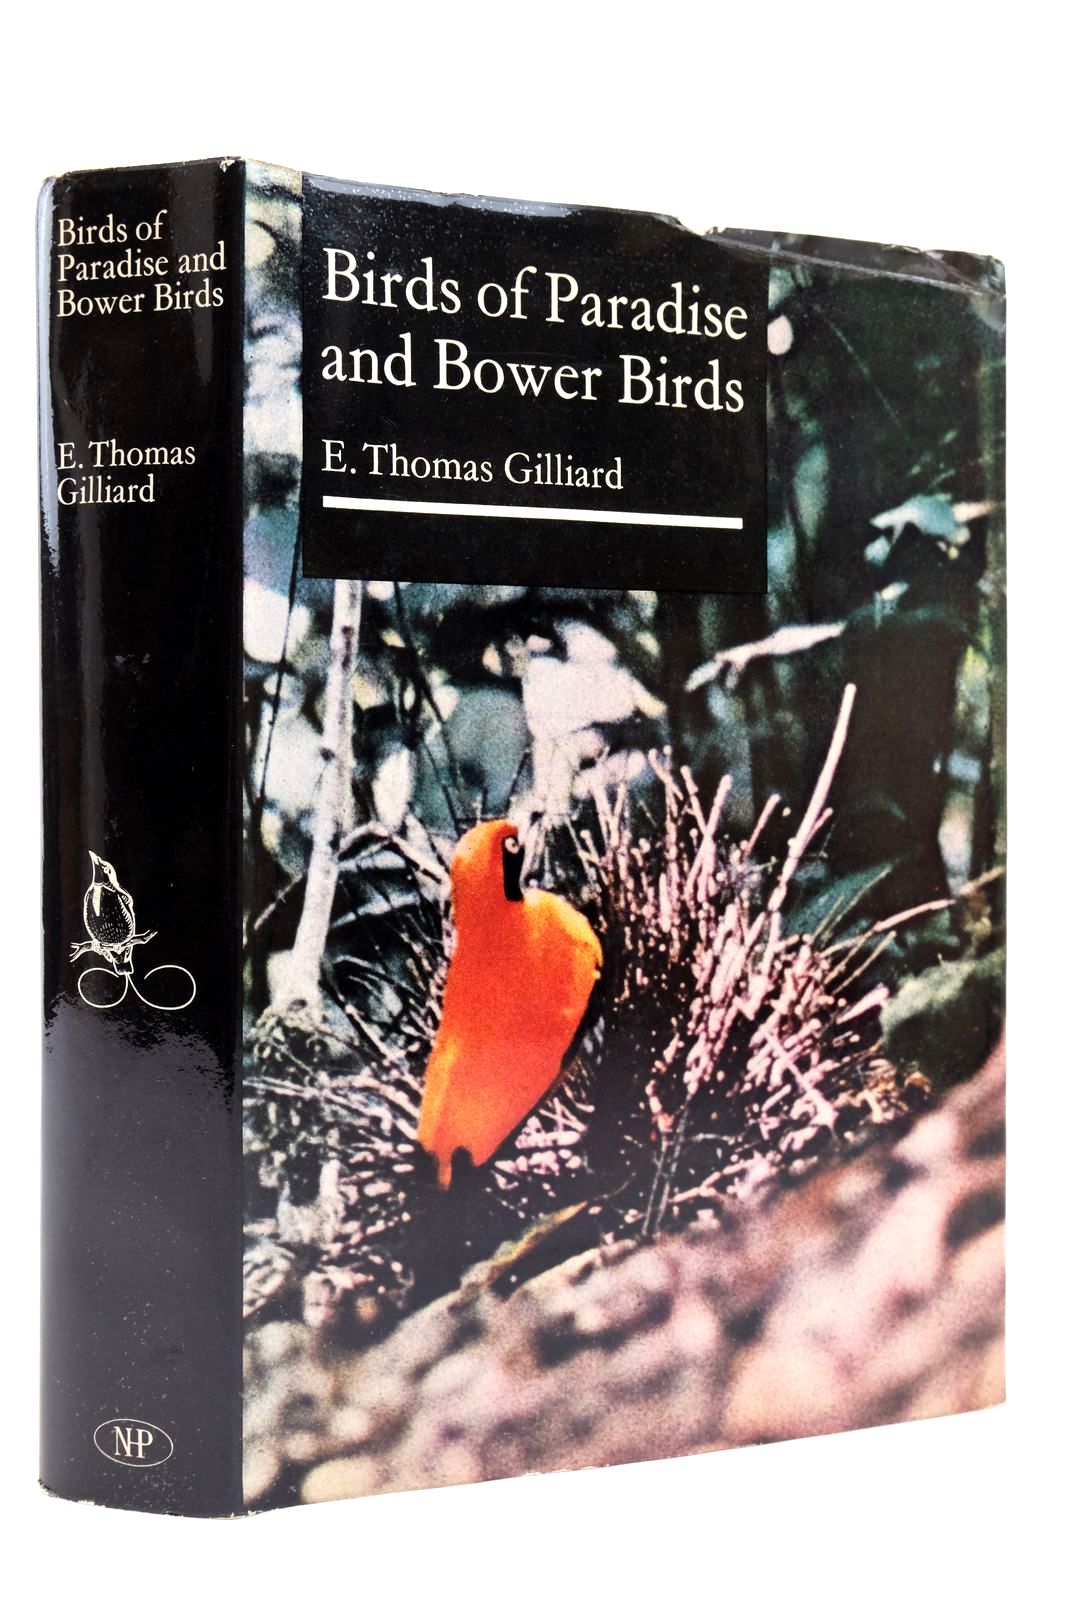 Photo of BIRDS OF PARADISE AND BOWER BIRDS written by Gilliard, E. Thomas published by The Natural History Press (STOCK CODE: 2139130)  for sale by Stella & Rose's Books